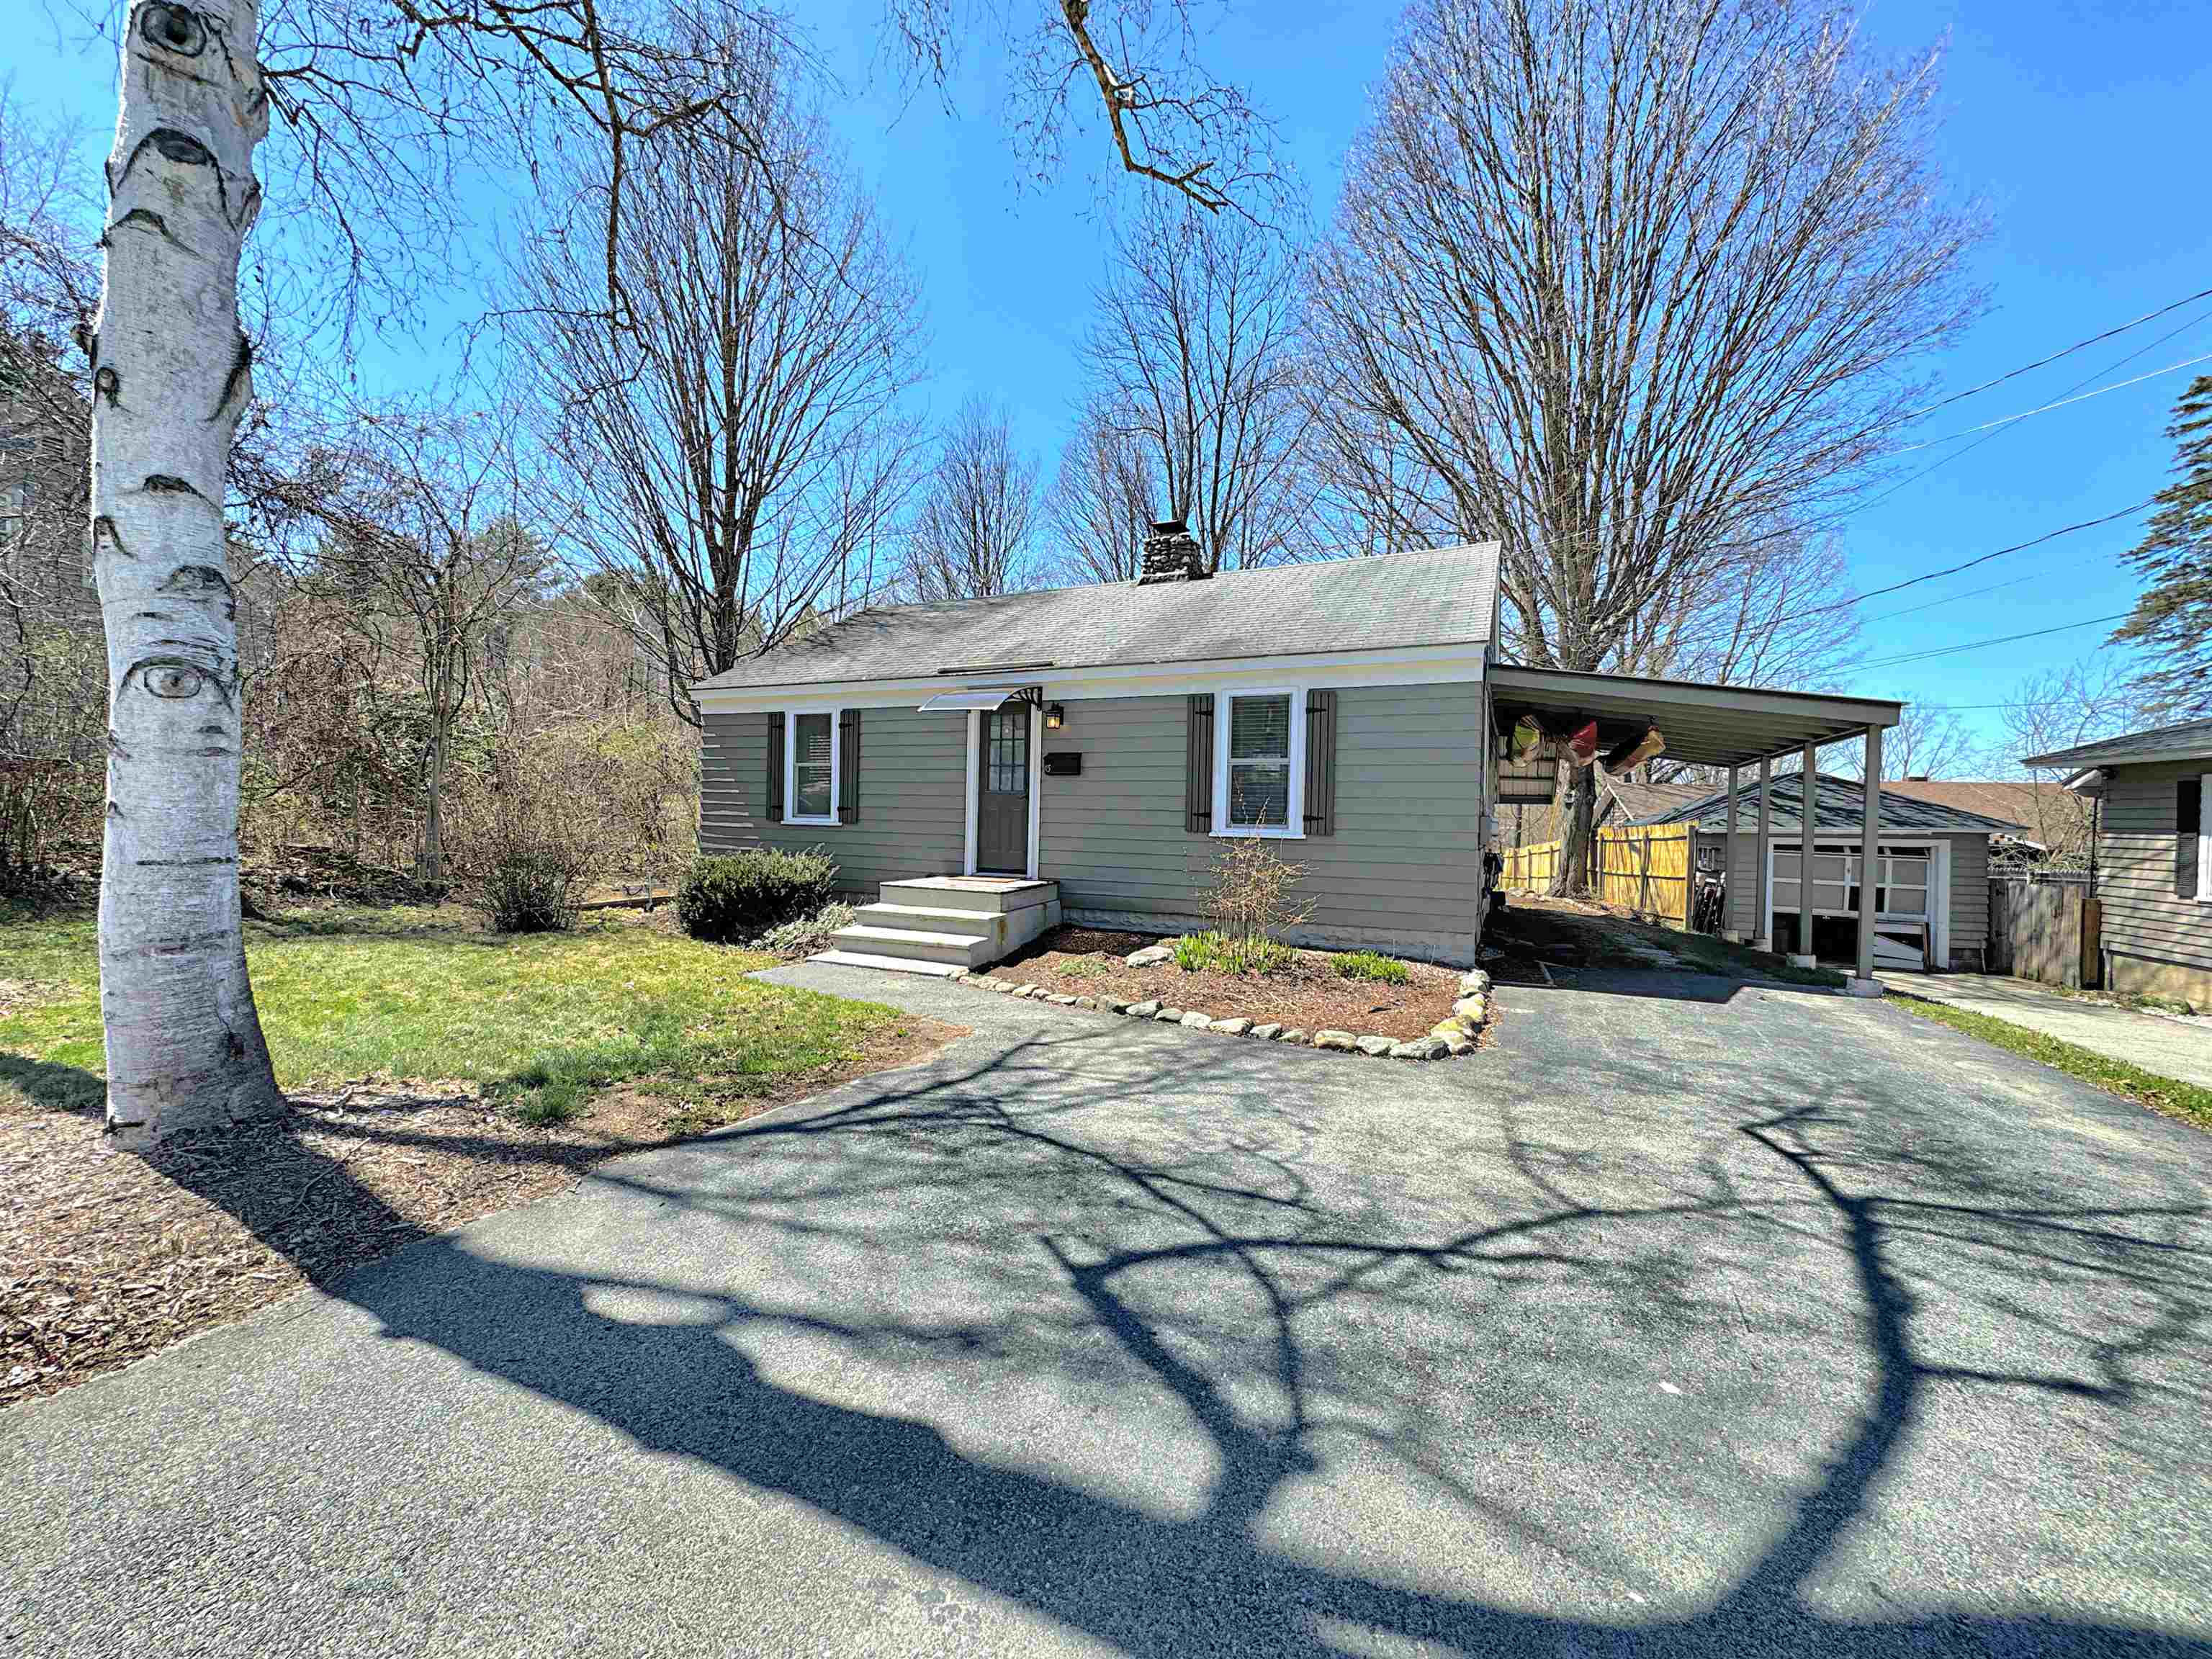 image of Claremont NH Home | sq.ft. 1605 